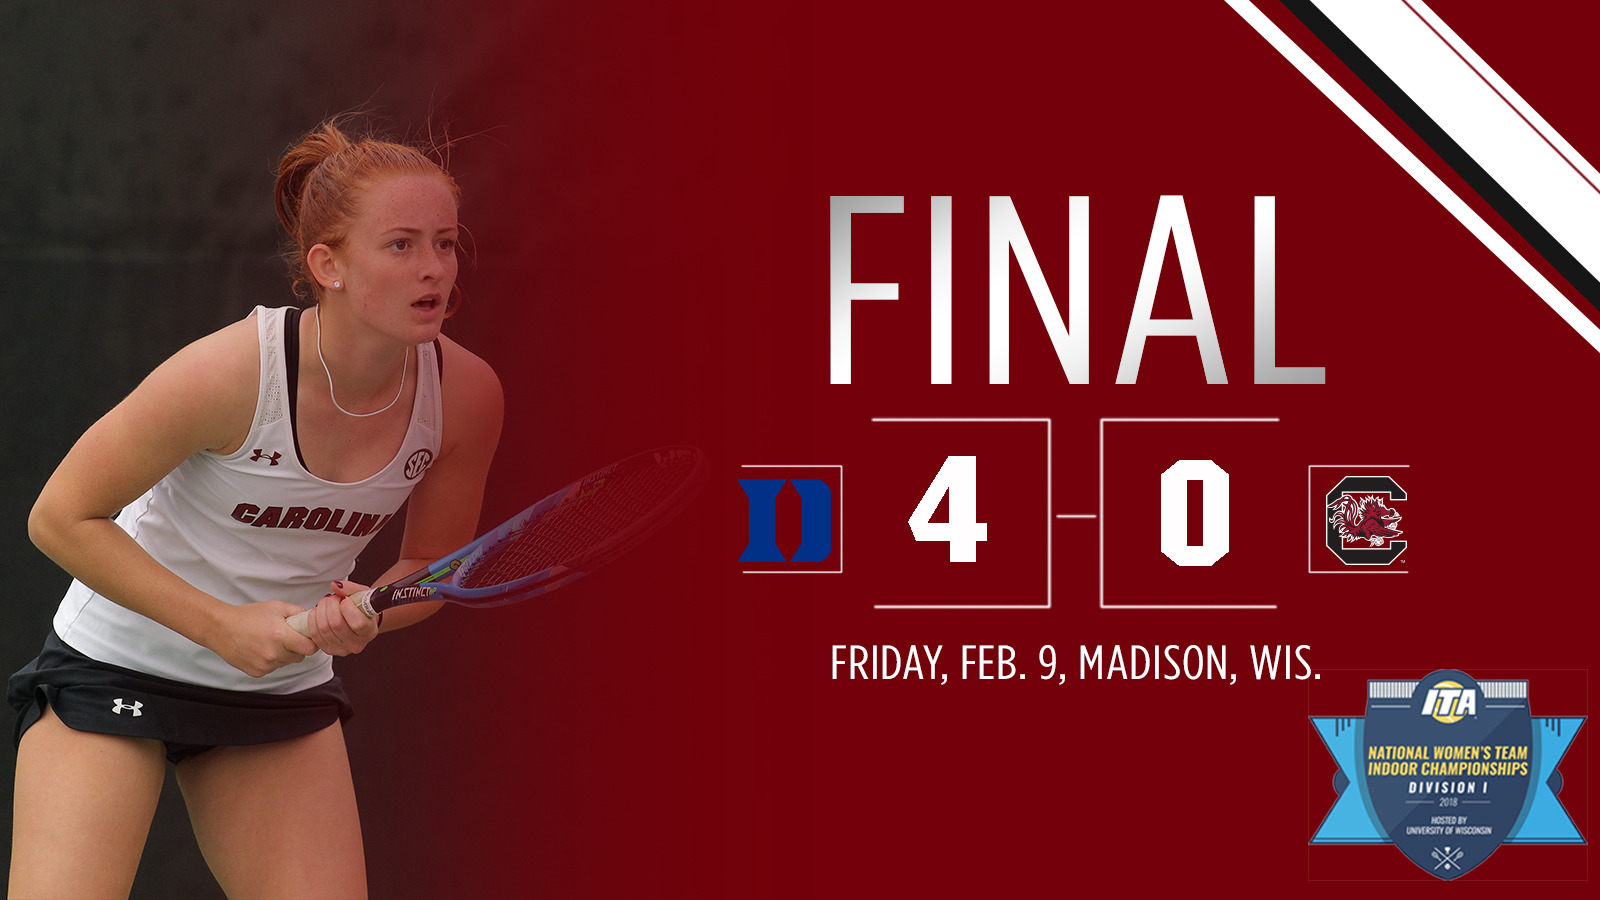 No. 19 South Carolina Blanked By No. 9 Duke In ITA Indoors Opening Match